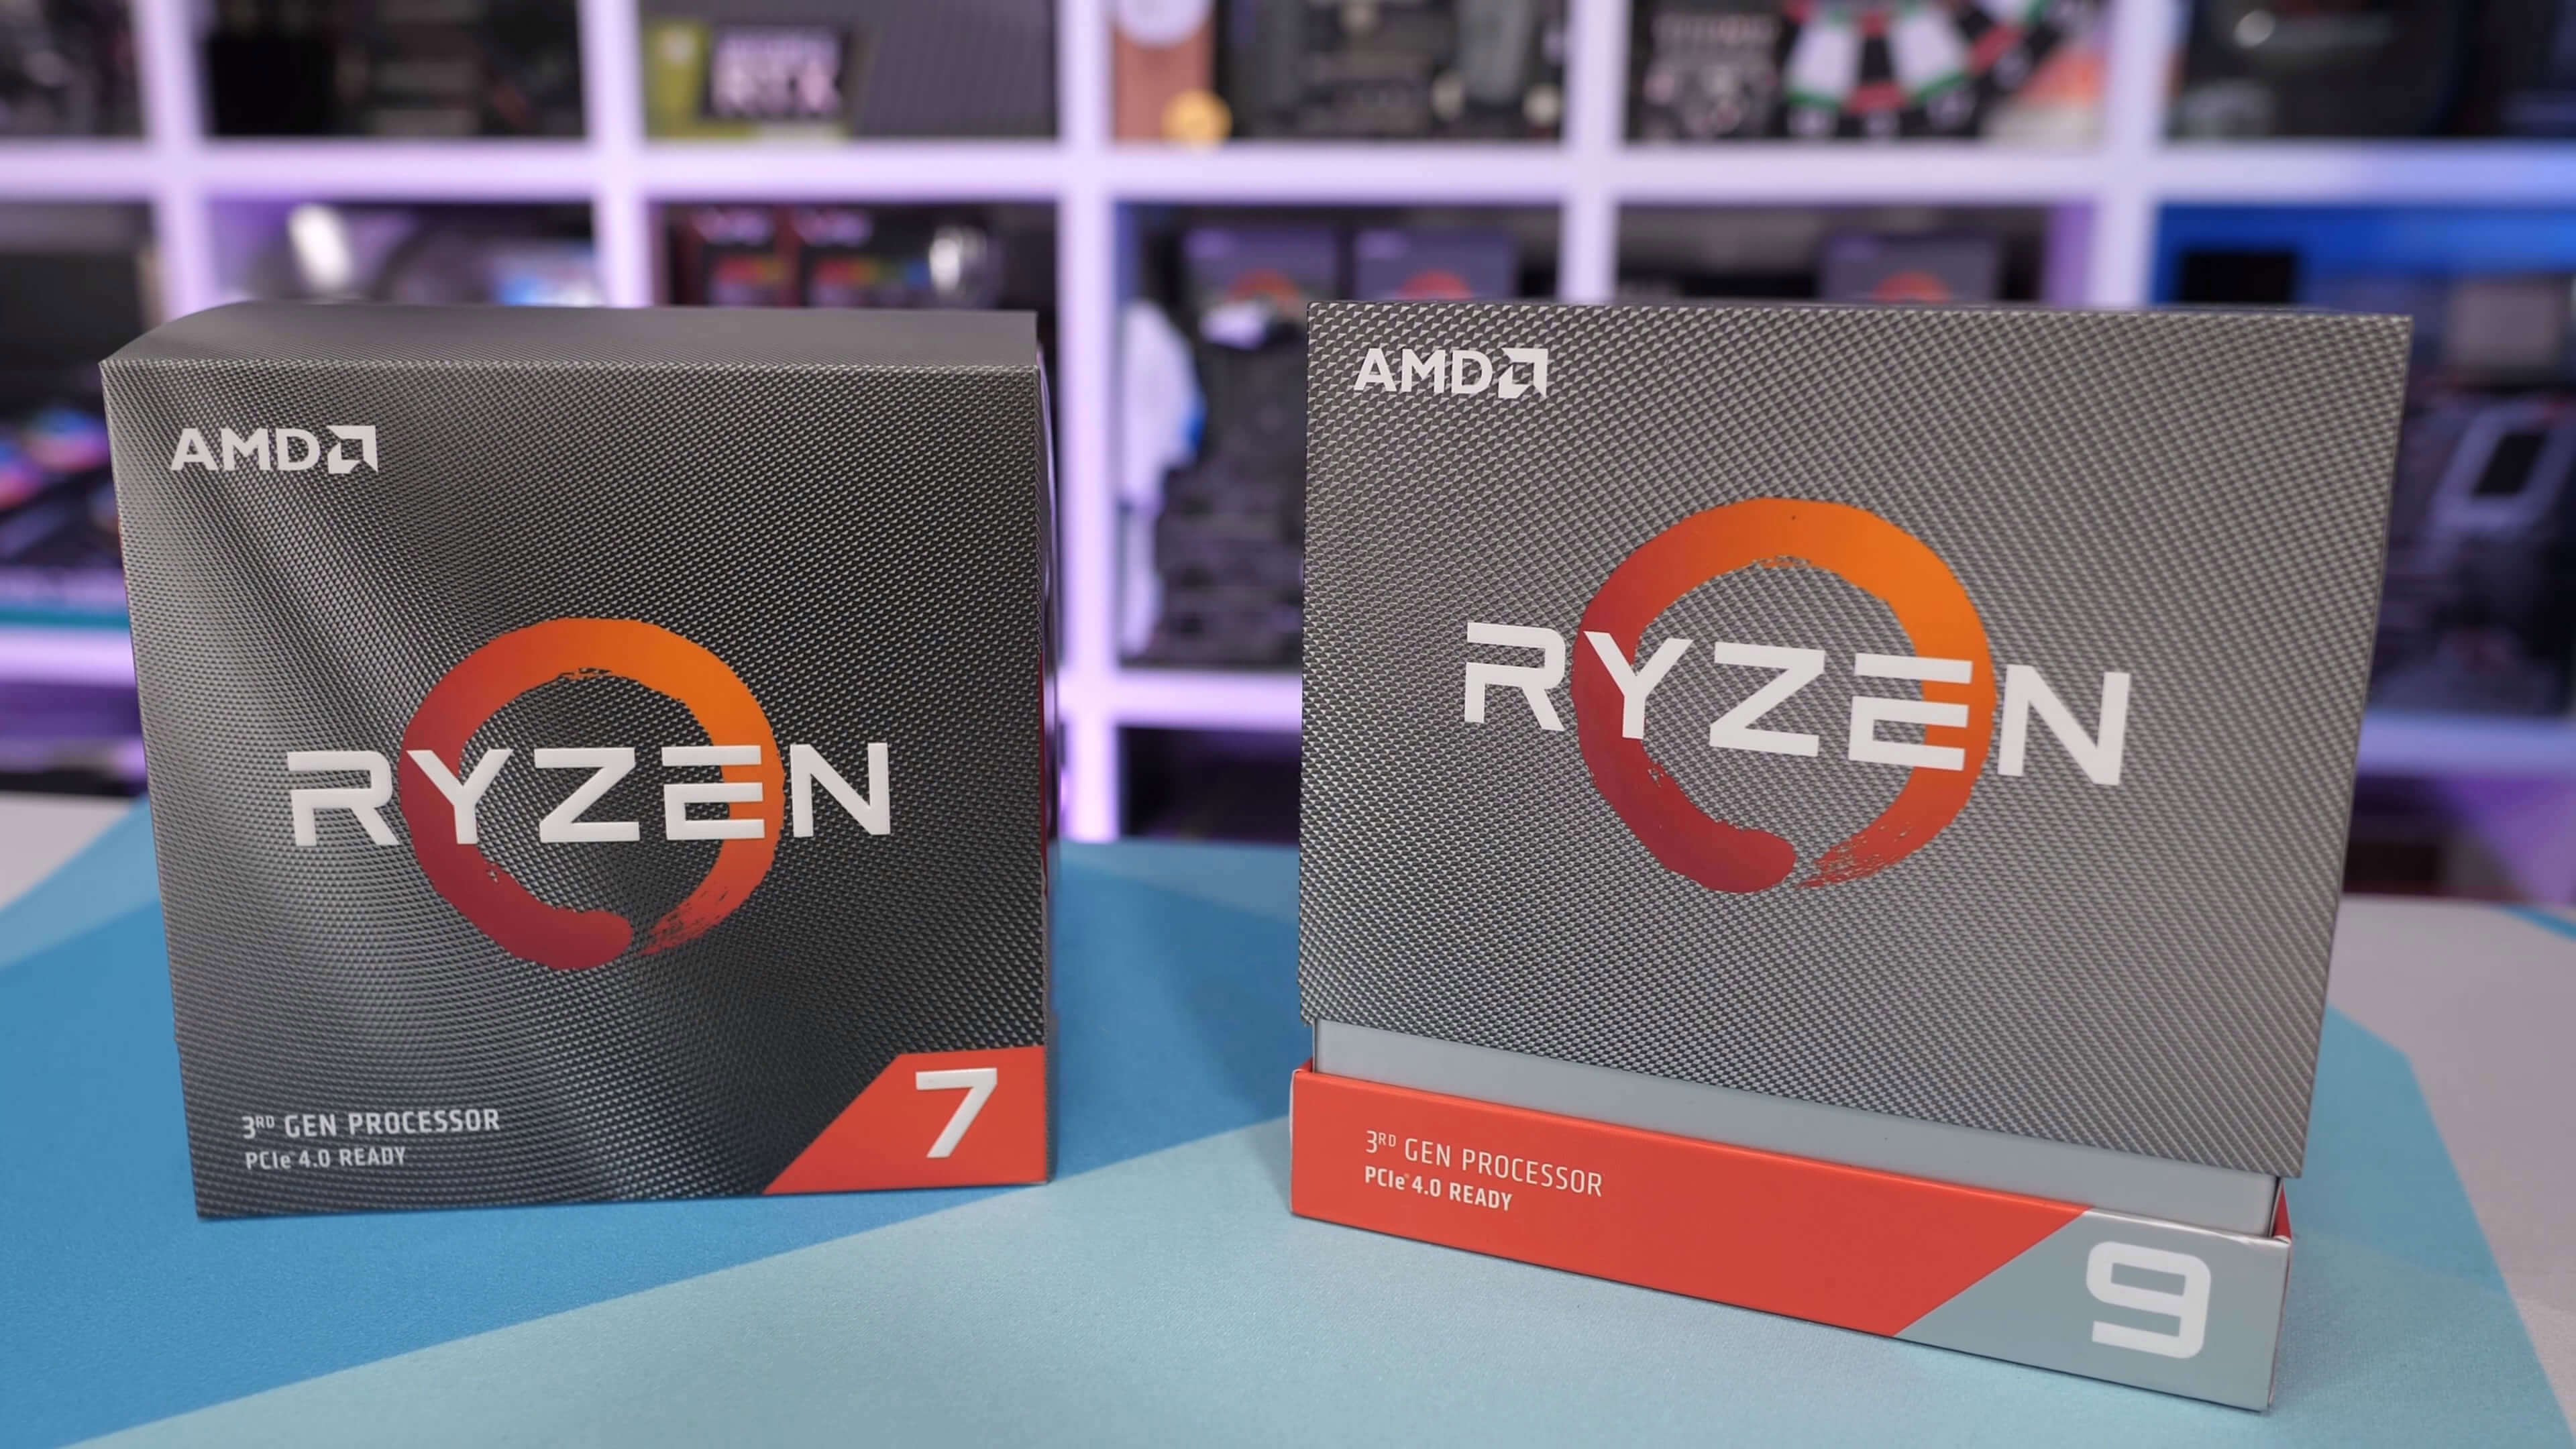 AMD discounts its Ryzen 3000 CPUs, gives away Xbox Game Pass with select models